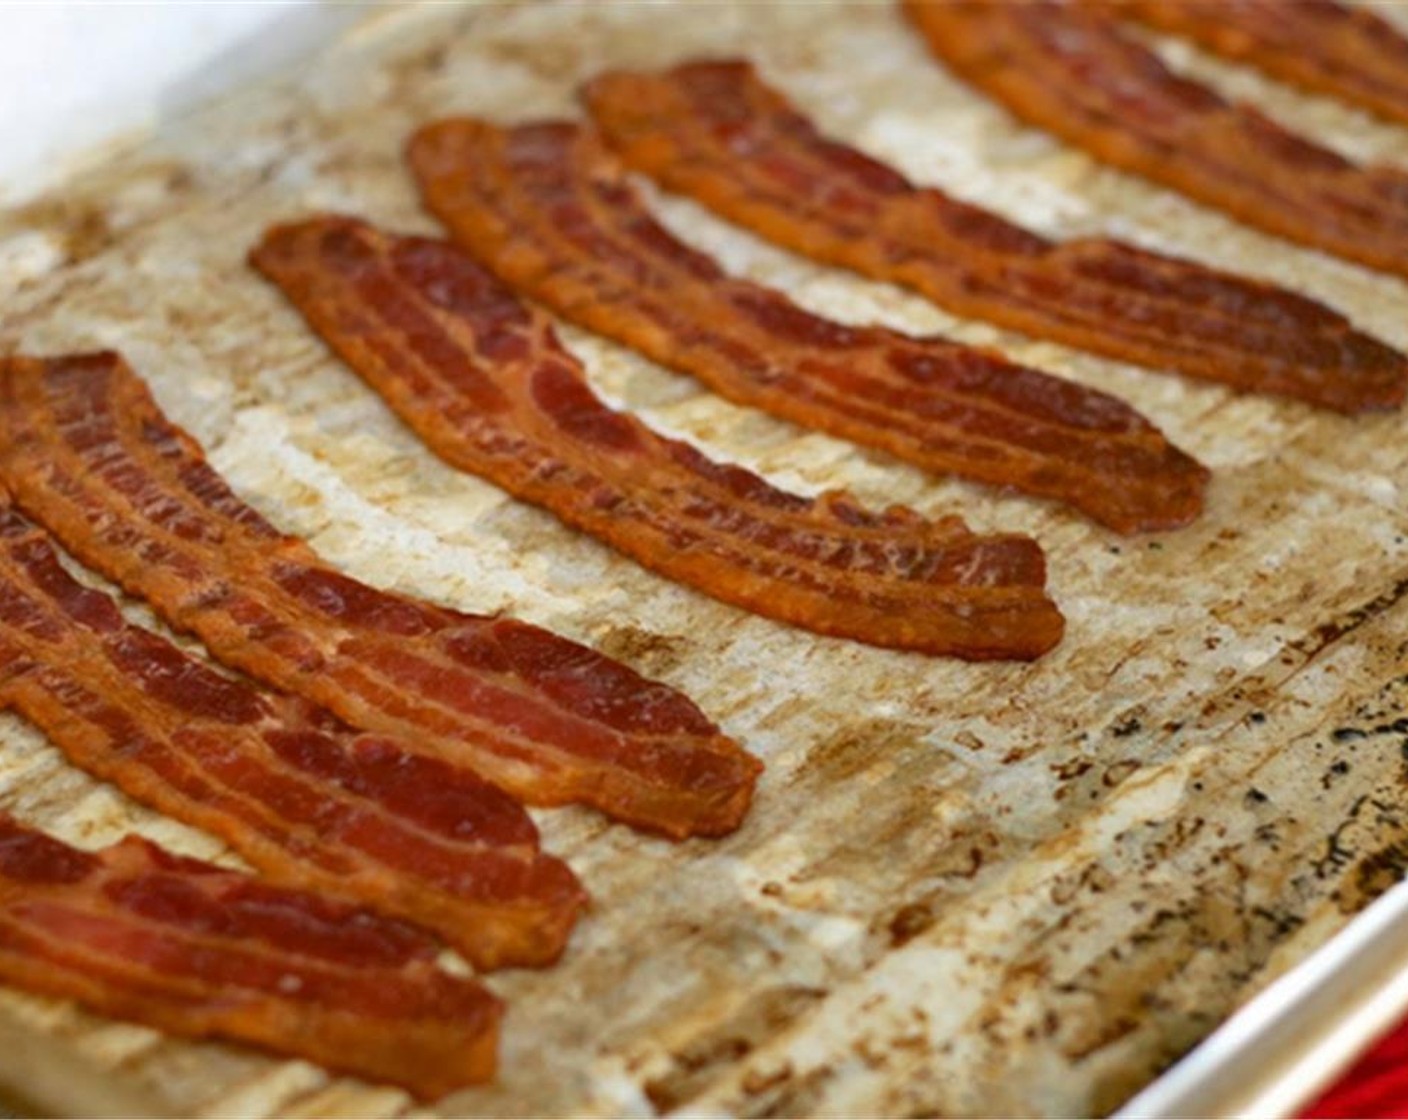 step 6 Cook bacon in a 350 degrees F (180 degrees C) oven for about 30 minutes or until bacon has rendered out all the fat and strips are crispy. Drain fat and store bacon covered at room temperature for up to 24 hours.